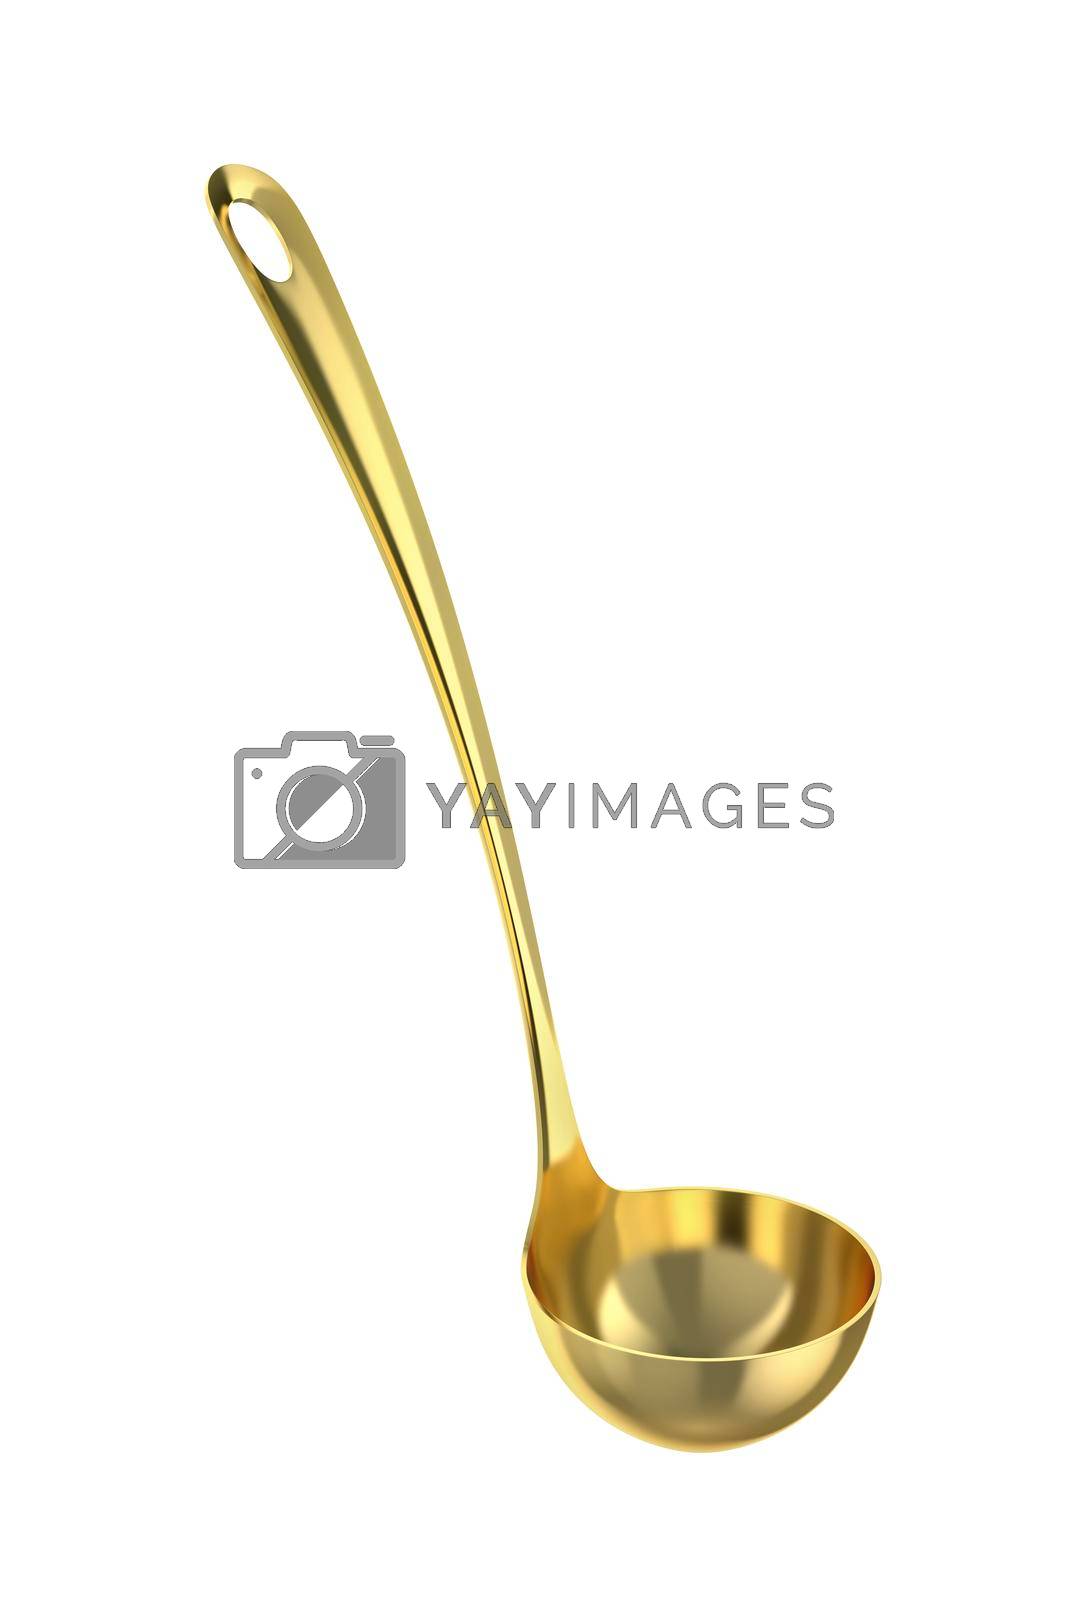 Royalty free image of Gold ladle by magraphics